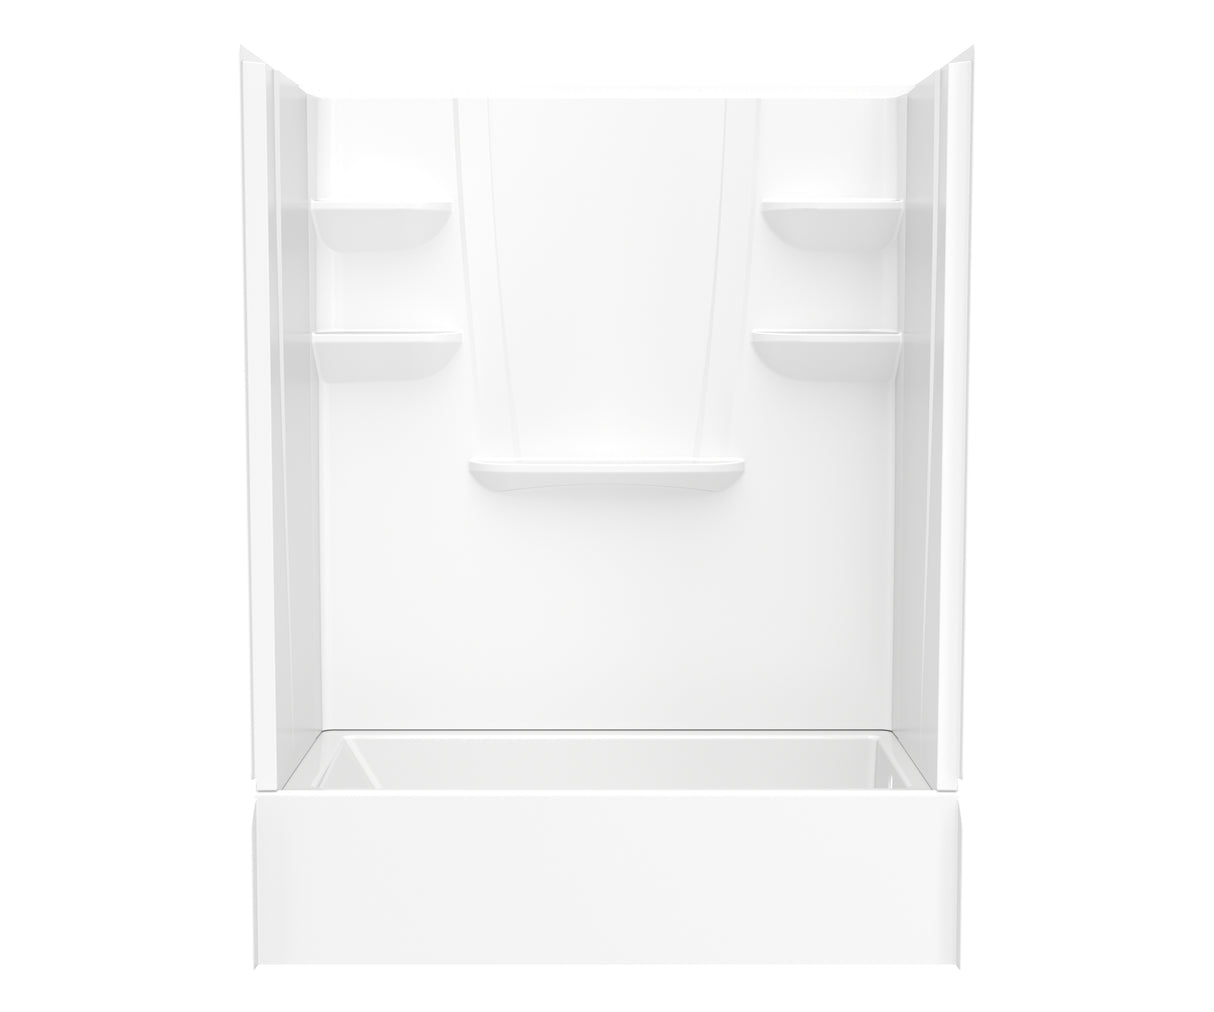 Swanstone VP6030CTSMINL/R 60 x 30 Solid Surface Alcove Left Hand Drain Four Piece Tub Shower in White VP6030CTSMINL.010